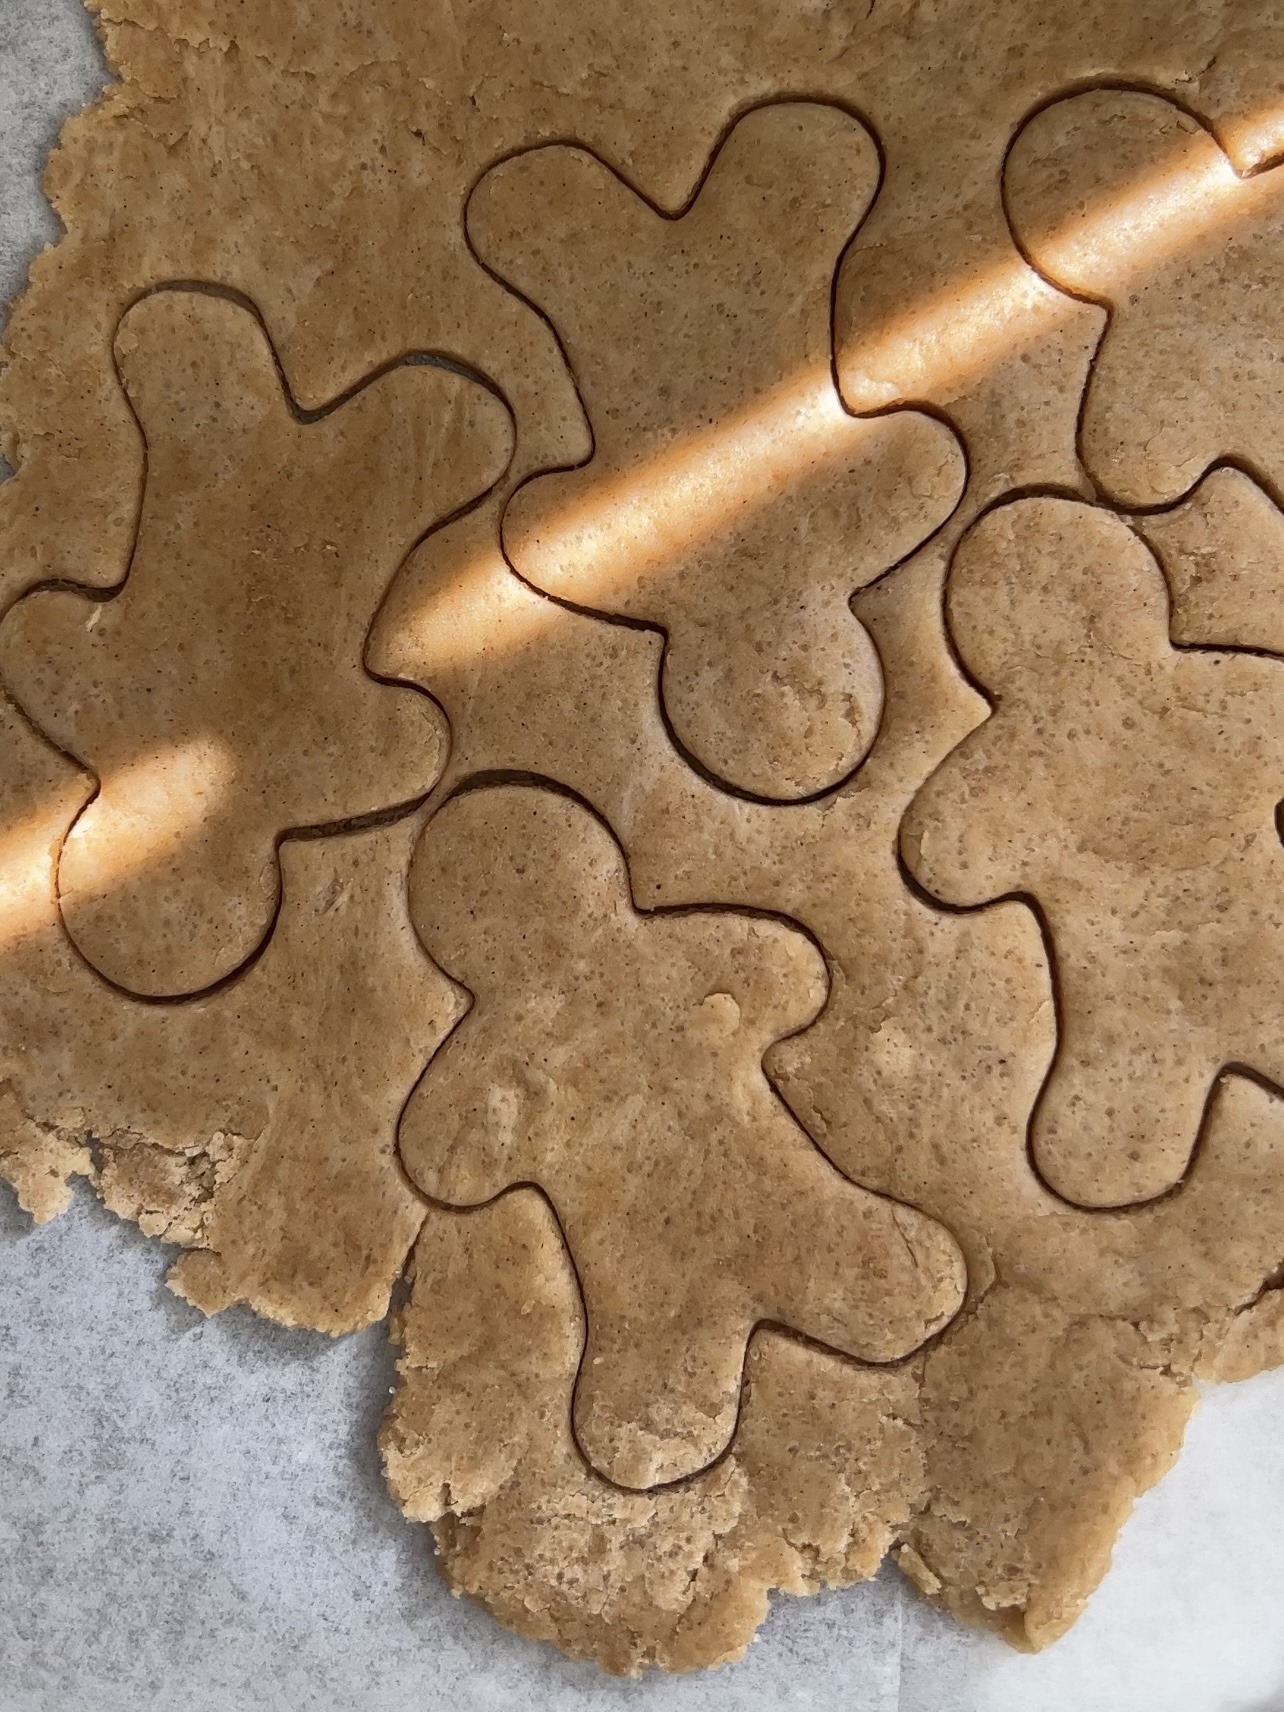 cutting the dough into cookie shapes